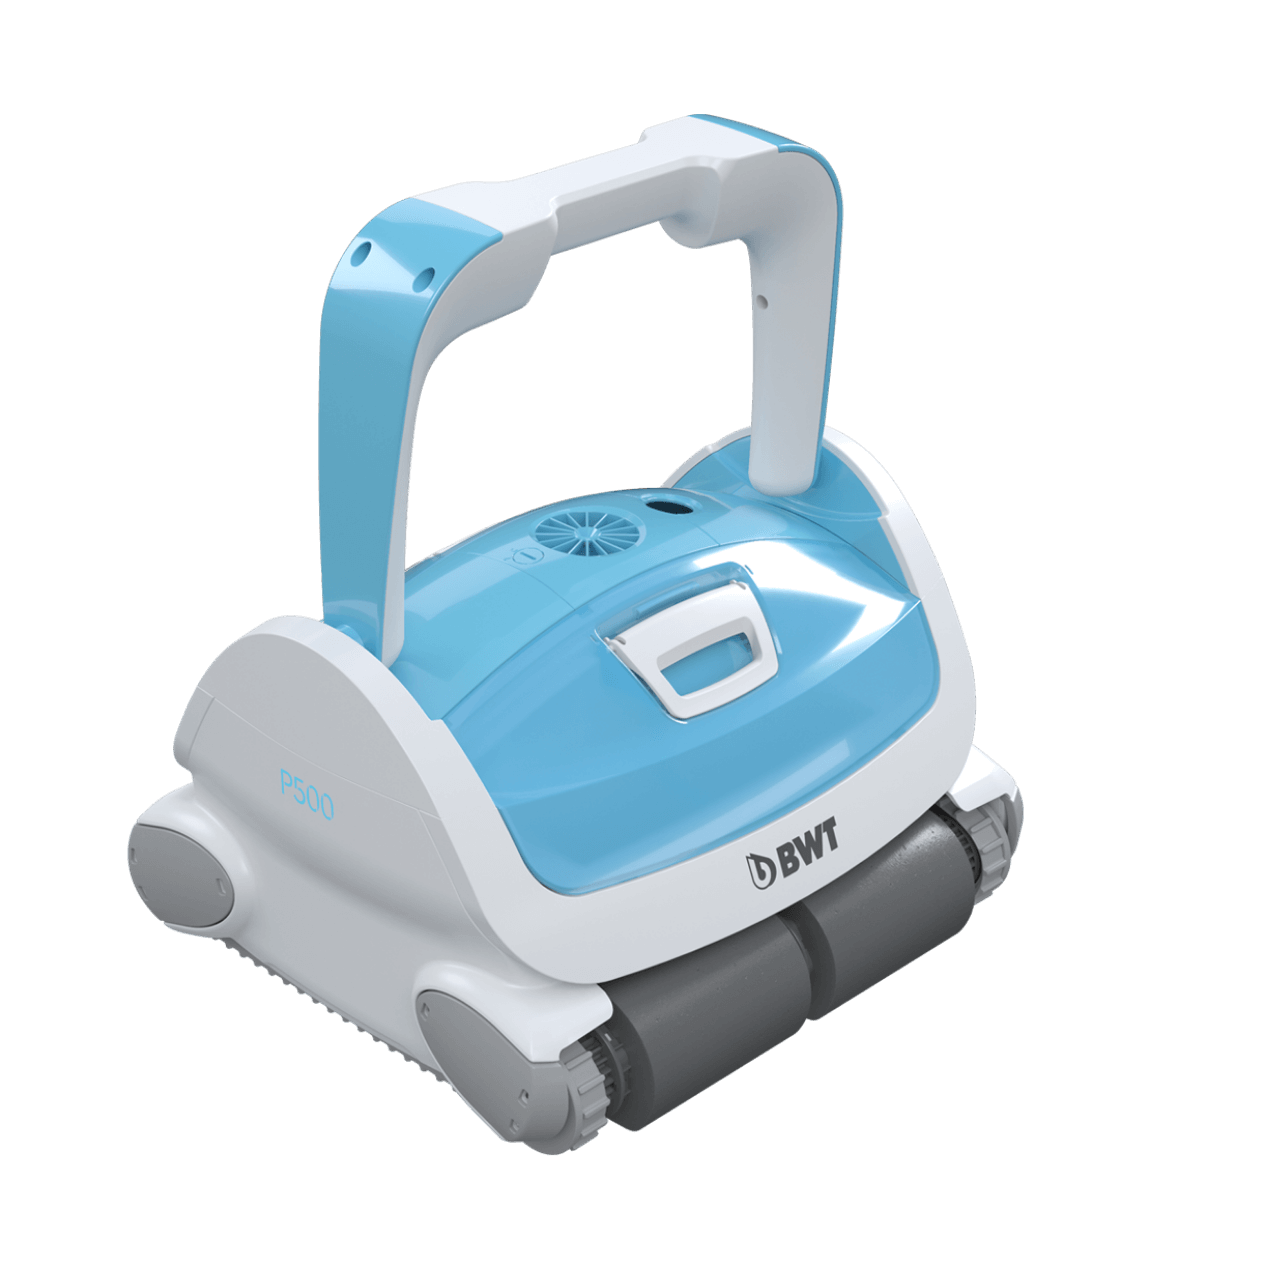 BWT Pool robot P500 for cleaning swimming pools